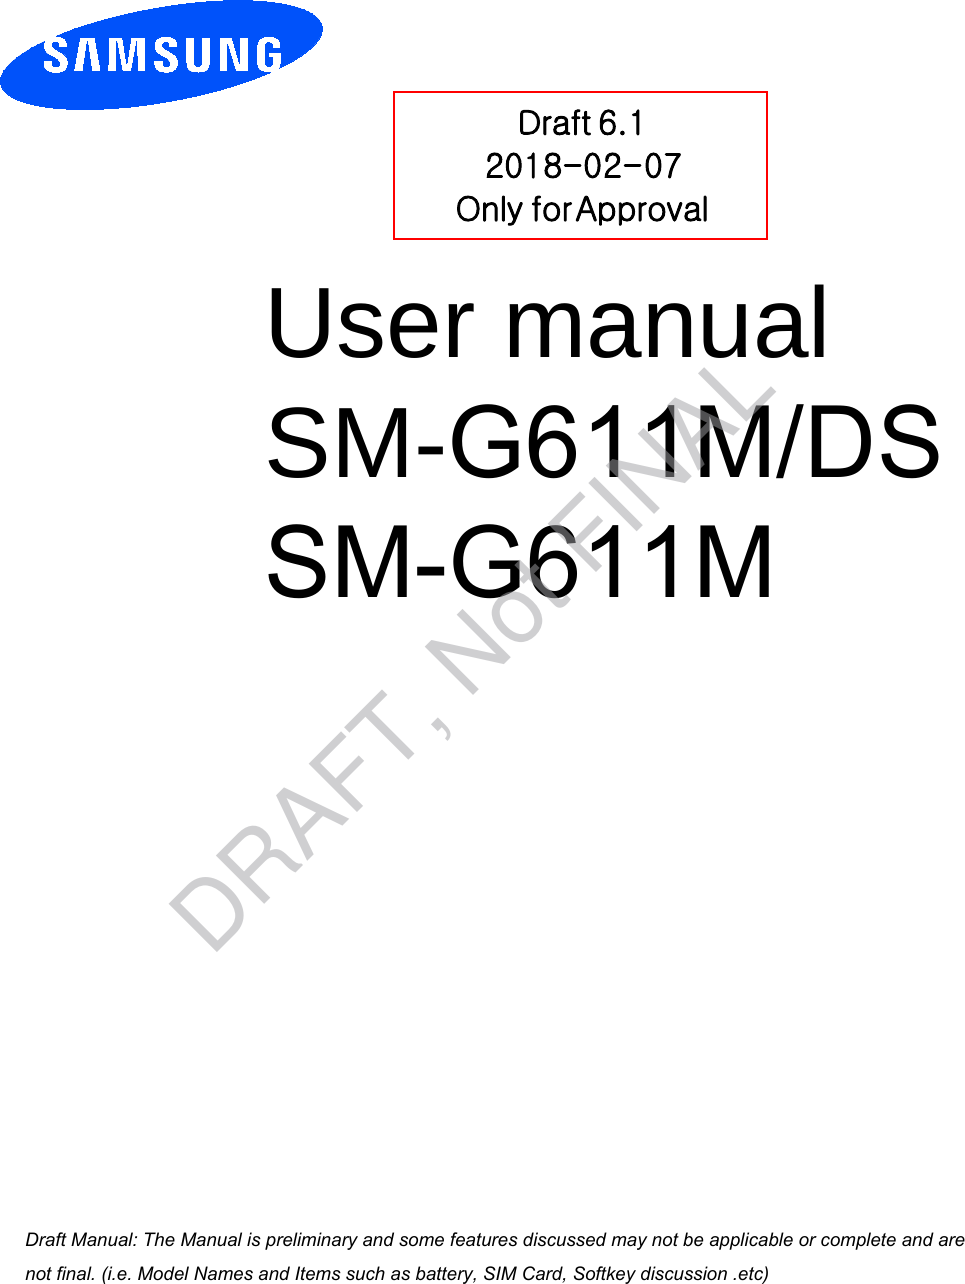 User manual SM-G611M/DSSM-G611M Draft 6.1 2018-02-07 Only for Approval a ana  ana  na and  a dd a n  aa   and a n na  d a and   a a  ad  dn DRAFT, Not FINAL